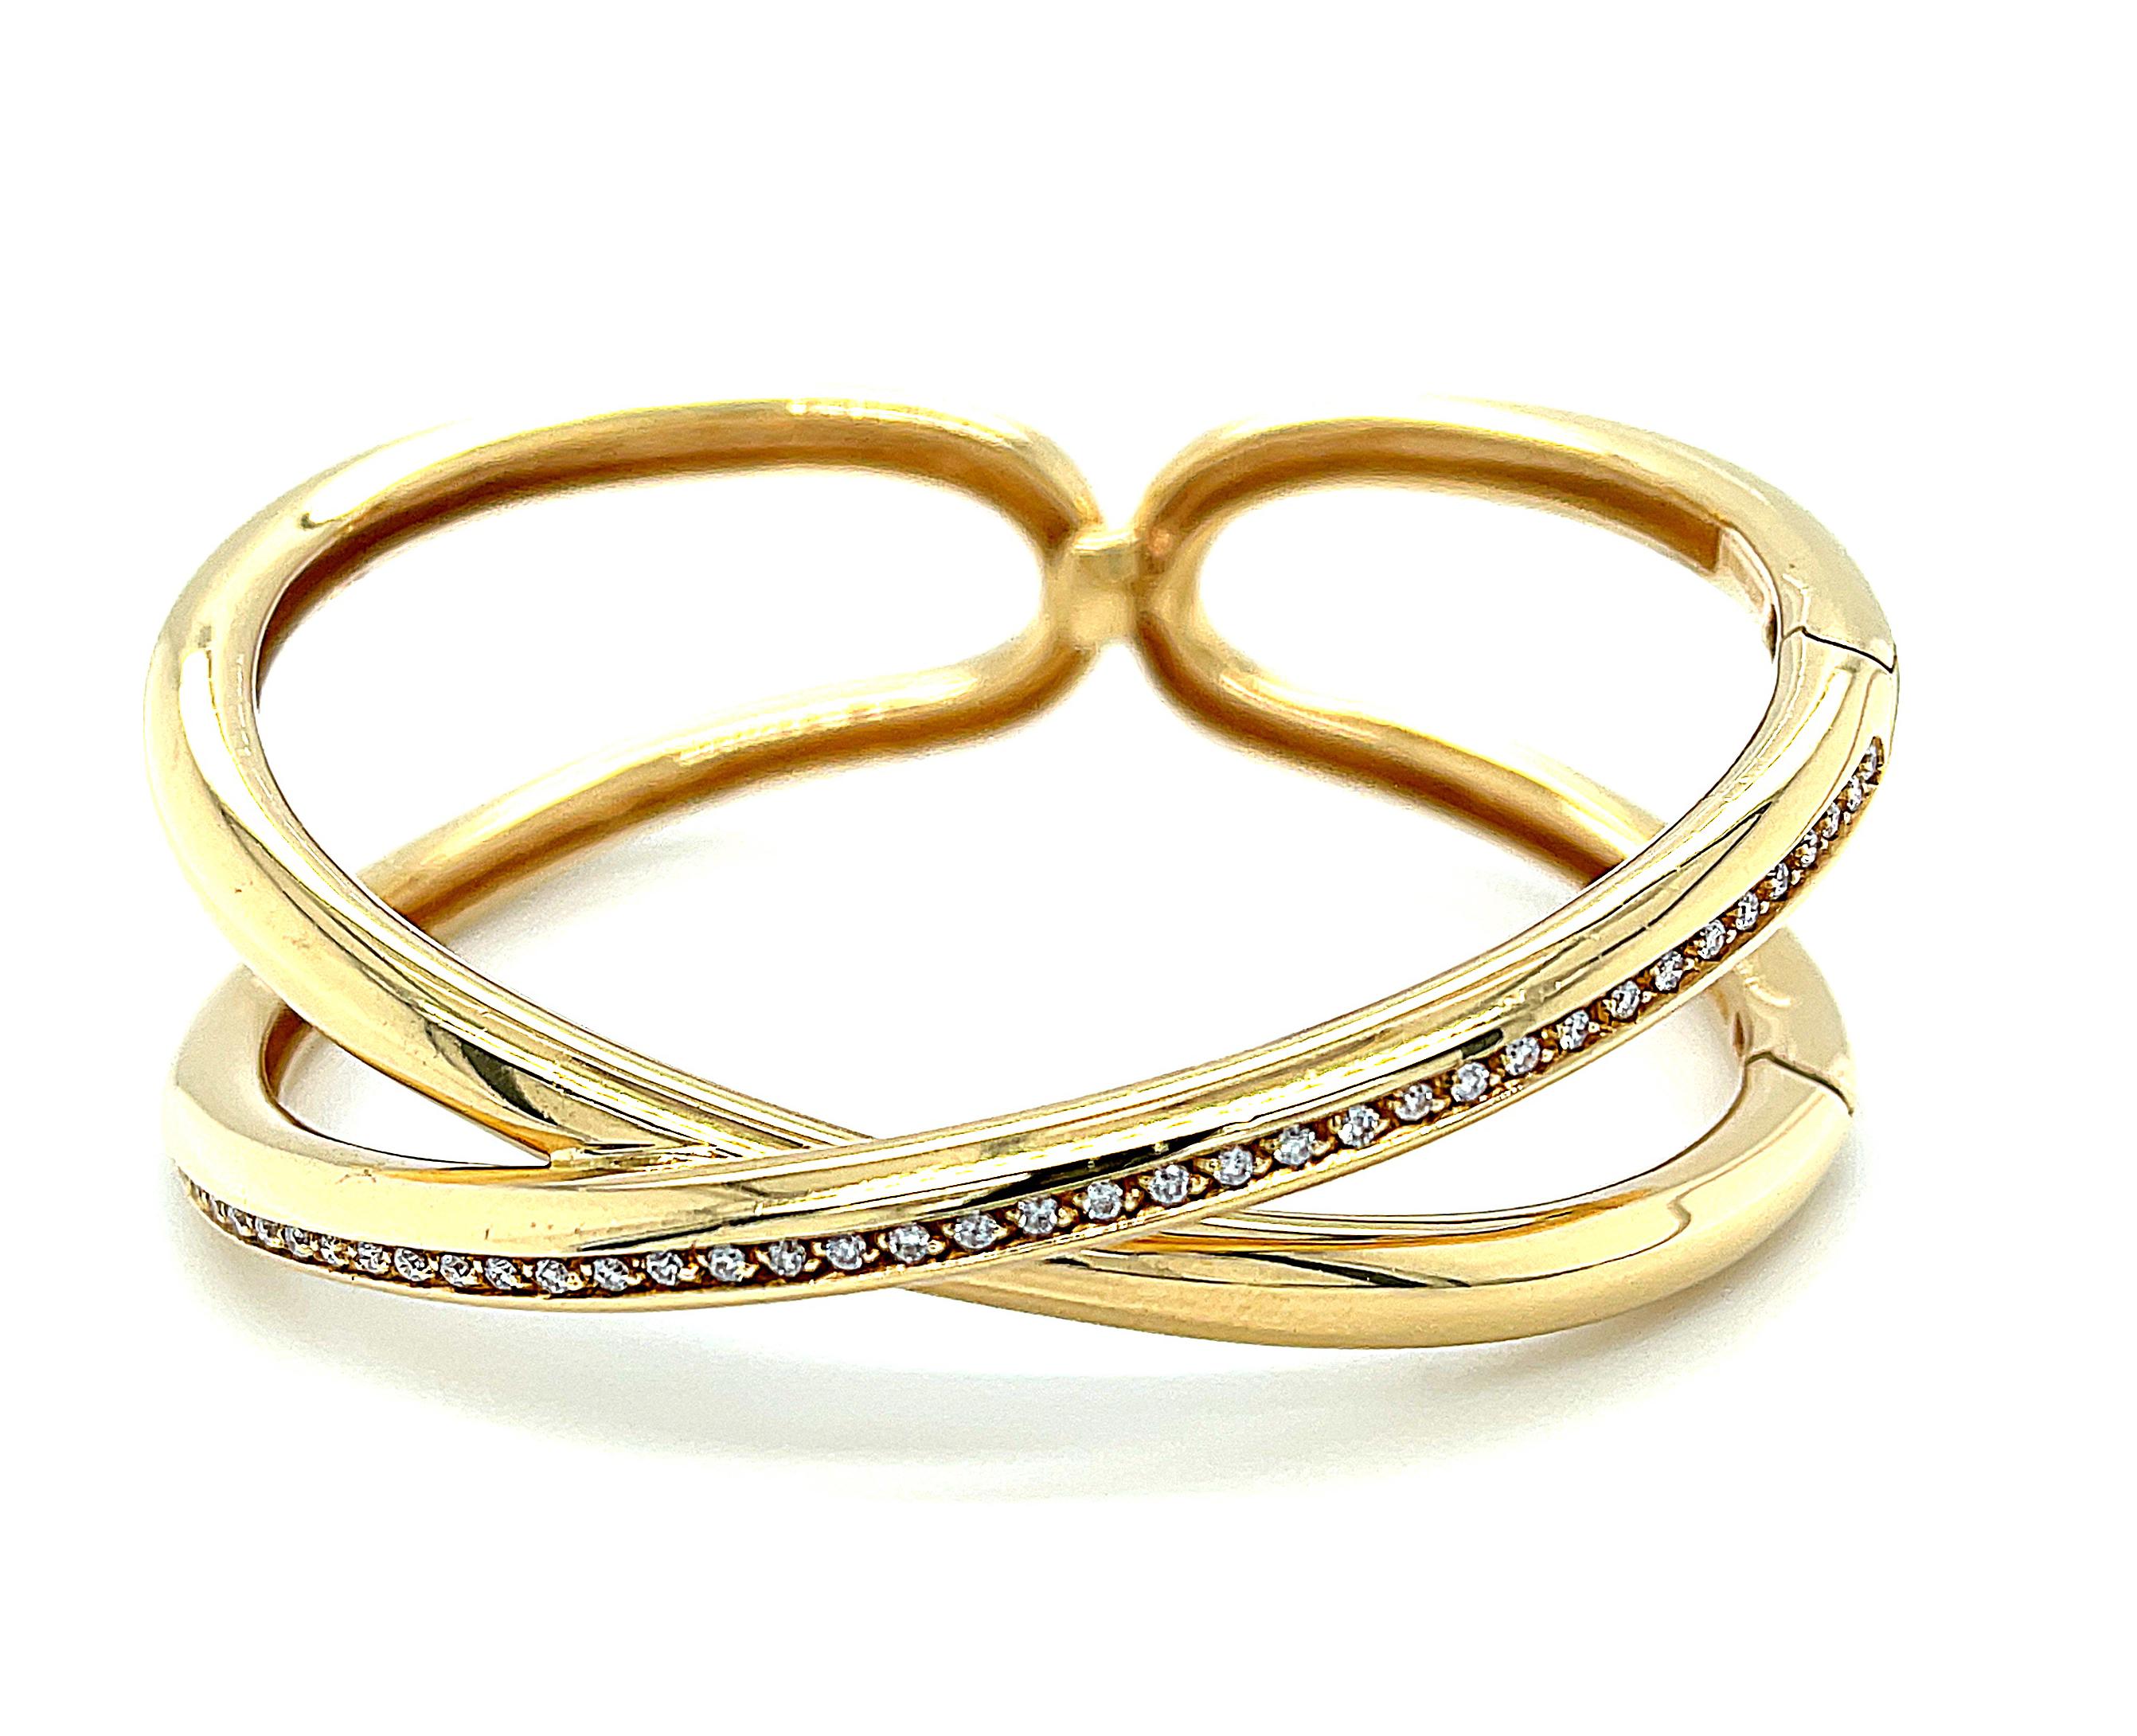 This sophisticated 18k yellow gold bangle bracelet is contemporary yet timeless, set with brilliant white diamonds in a creation by Italian jewelry designer, Antonini. Two heavy, rounded bands criss-cross to form this elegant 